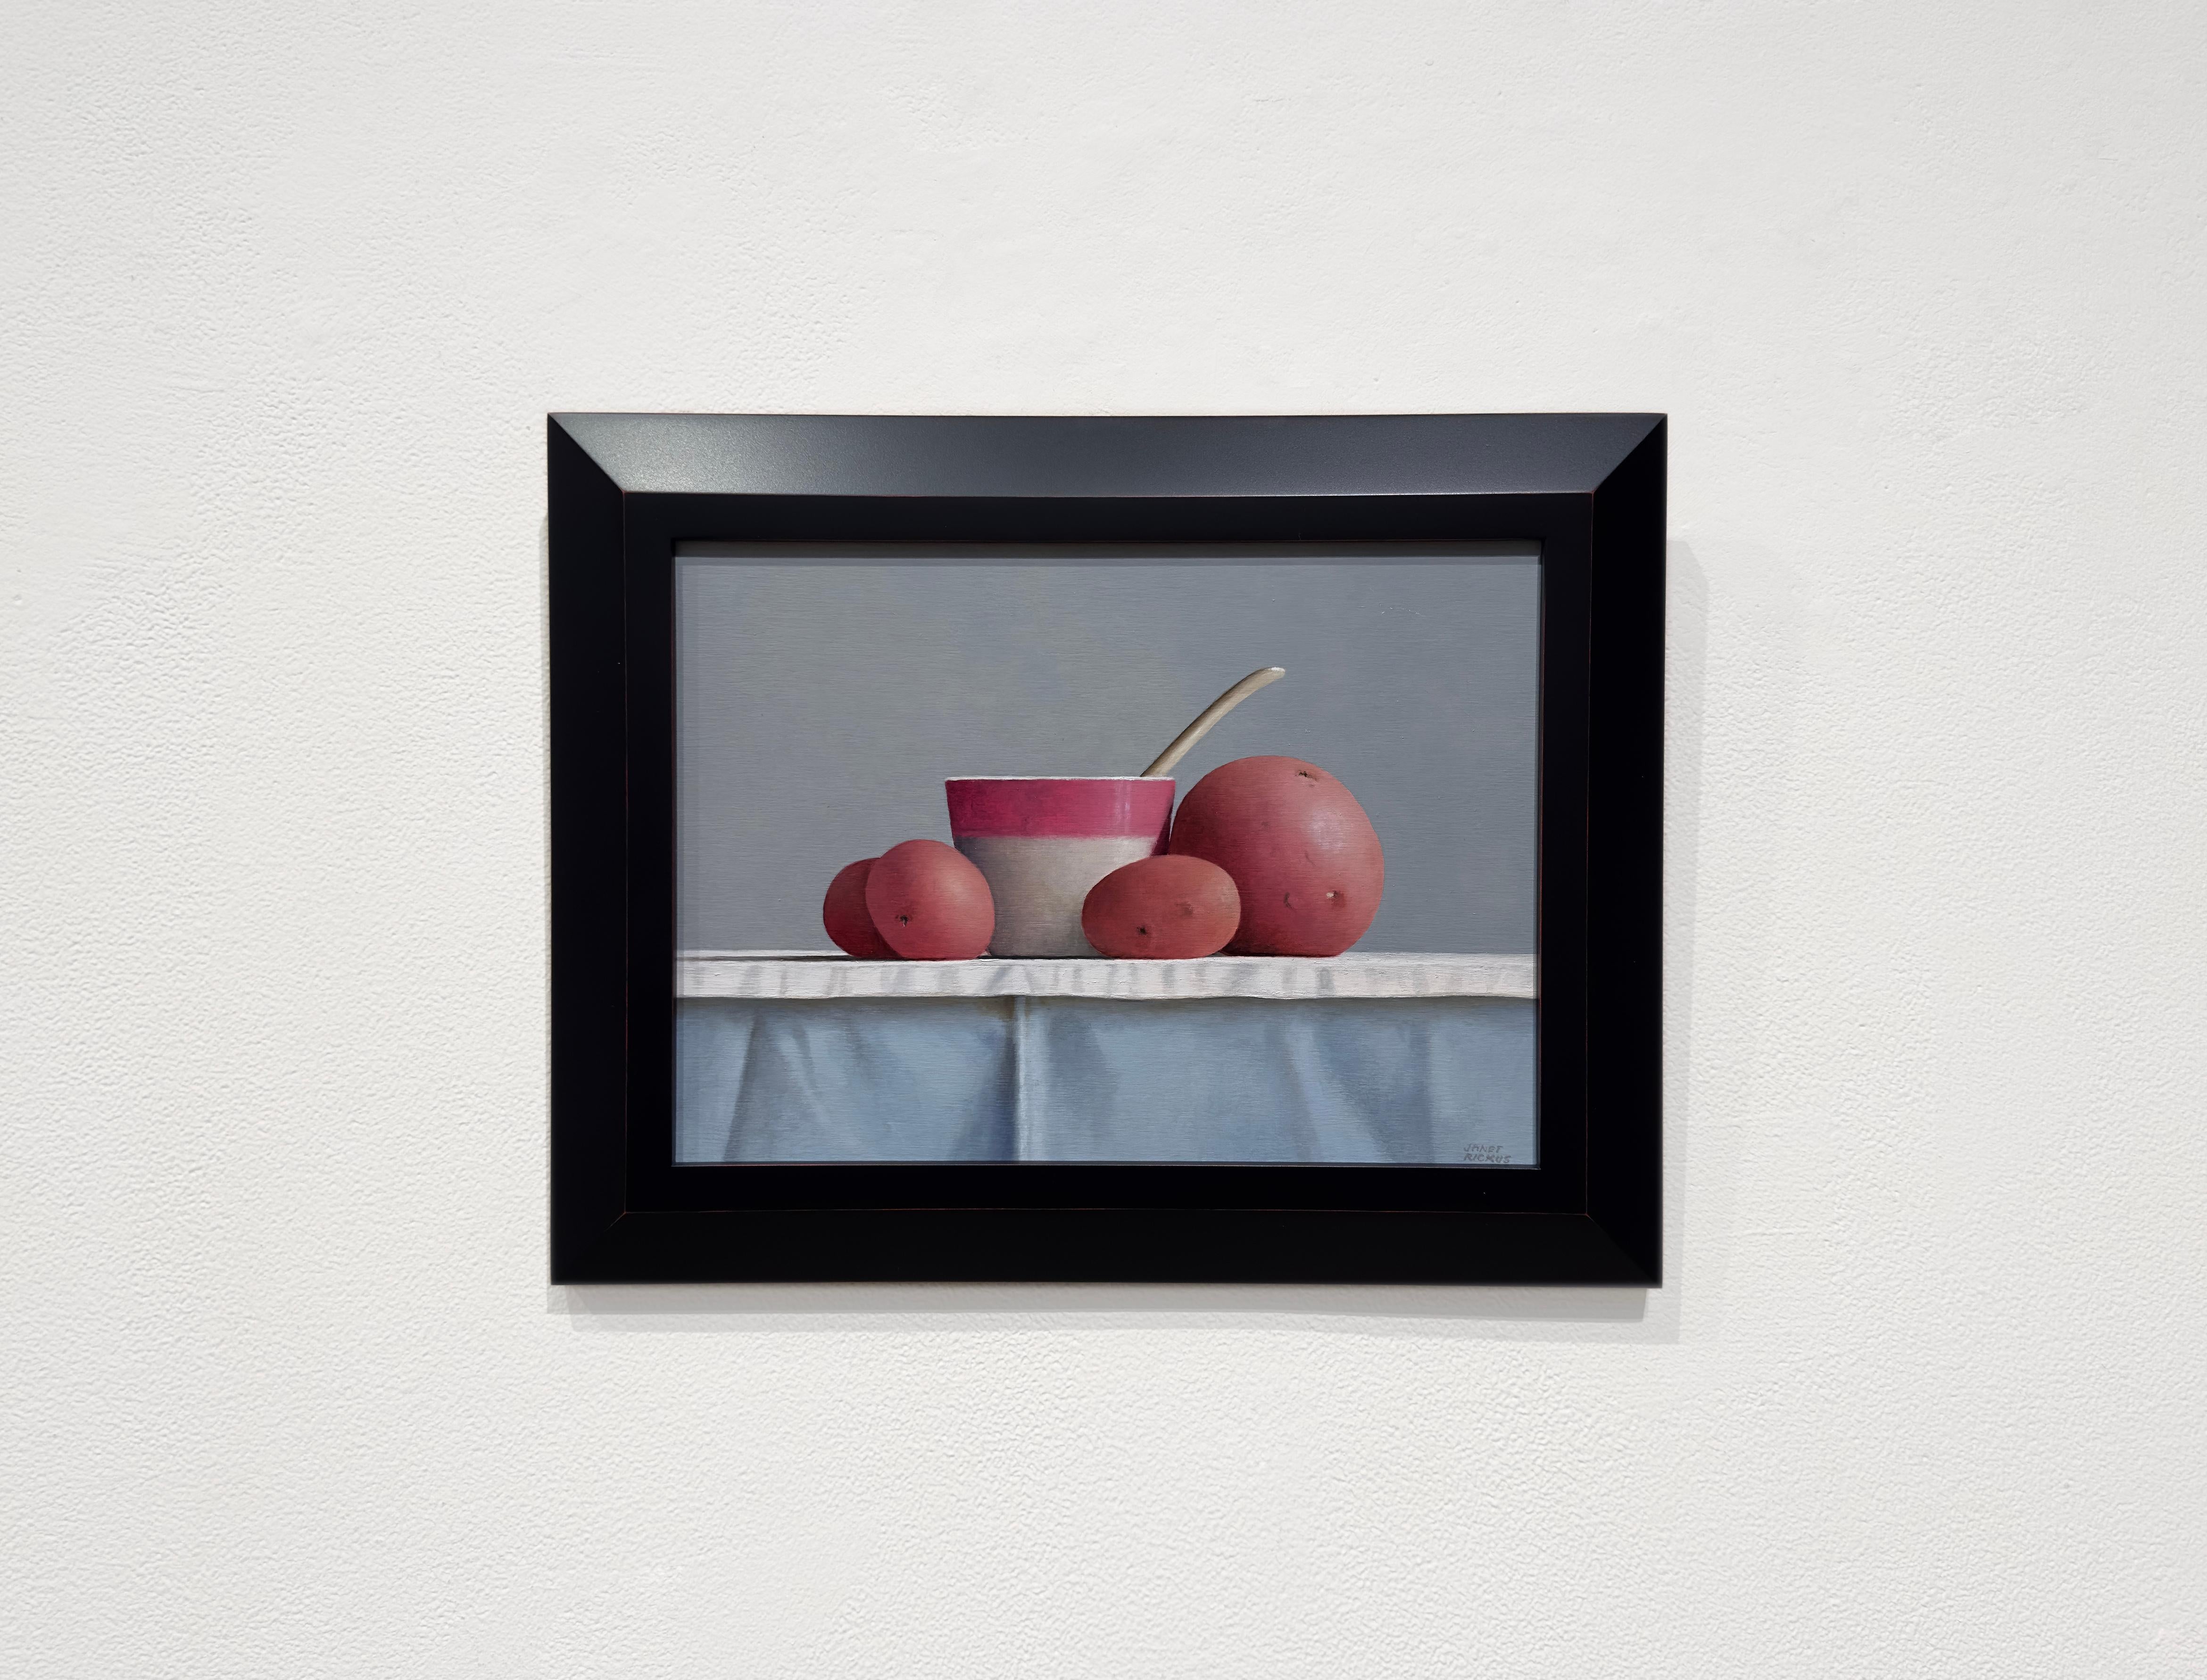 ROSE-RIMMED - Realism / Contemporary Kitchen Still Life / Potatoes - Painting by Janet Rickus